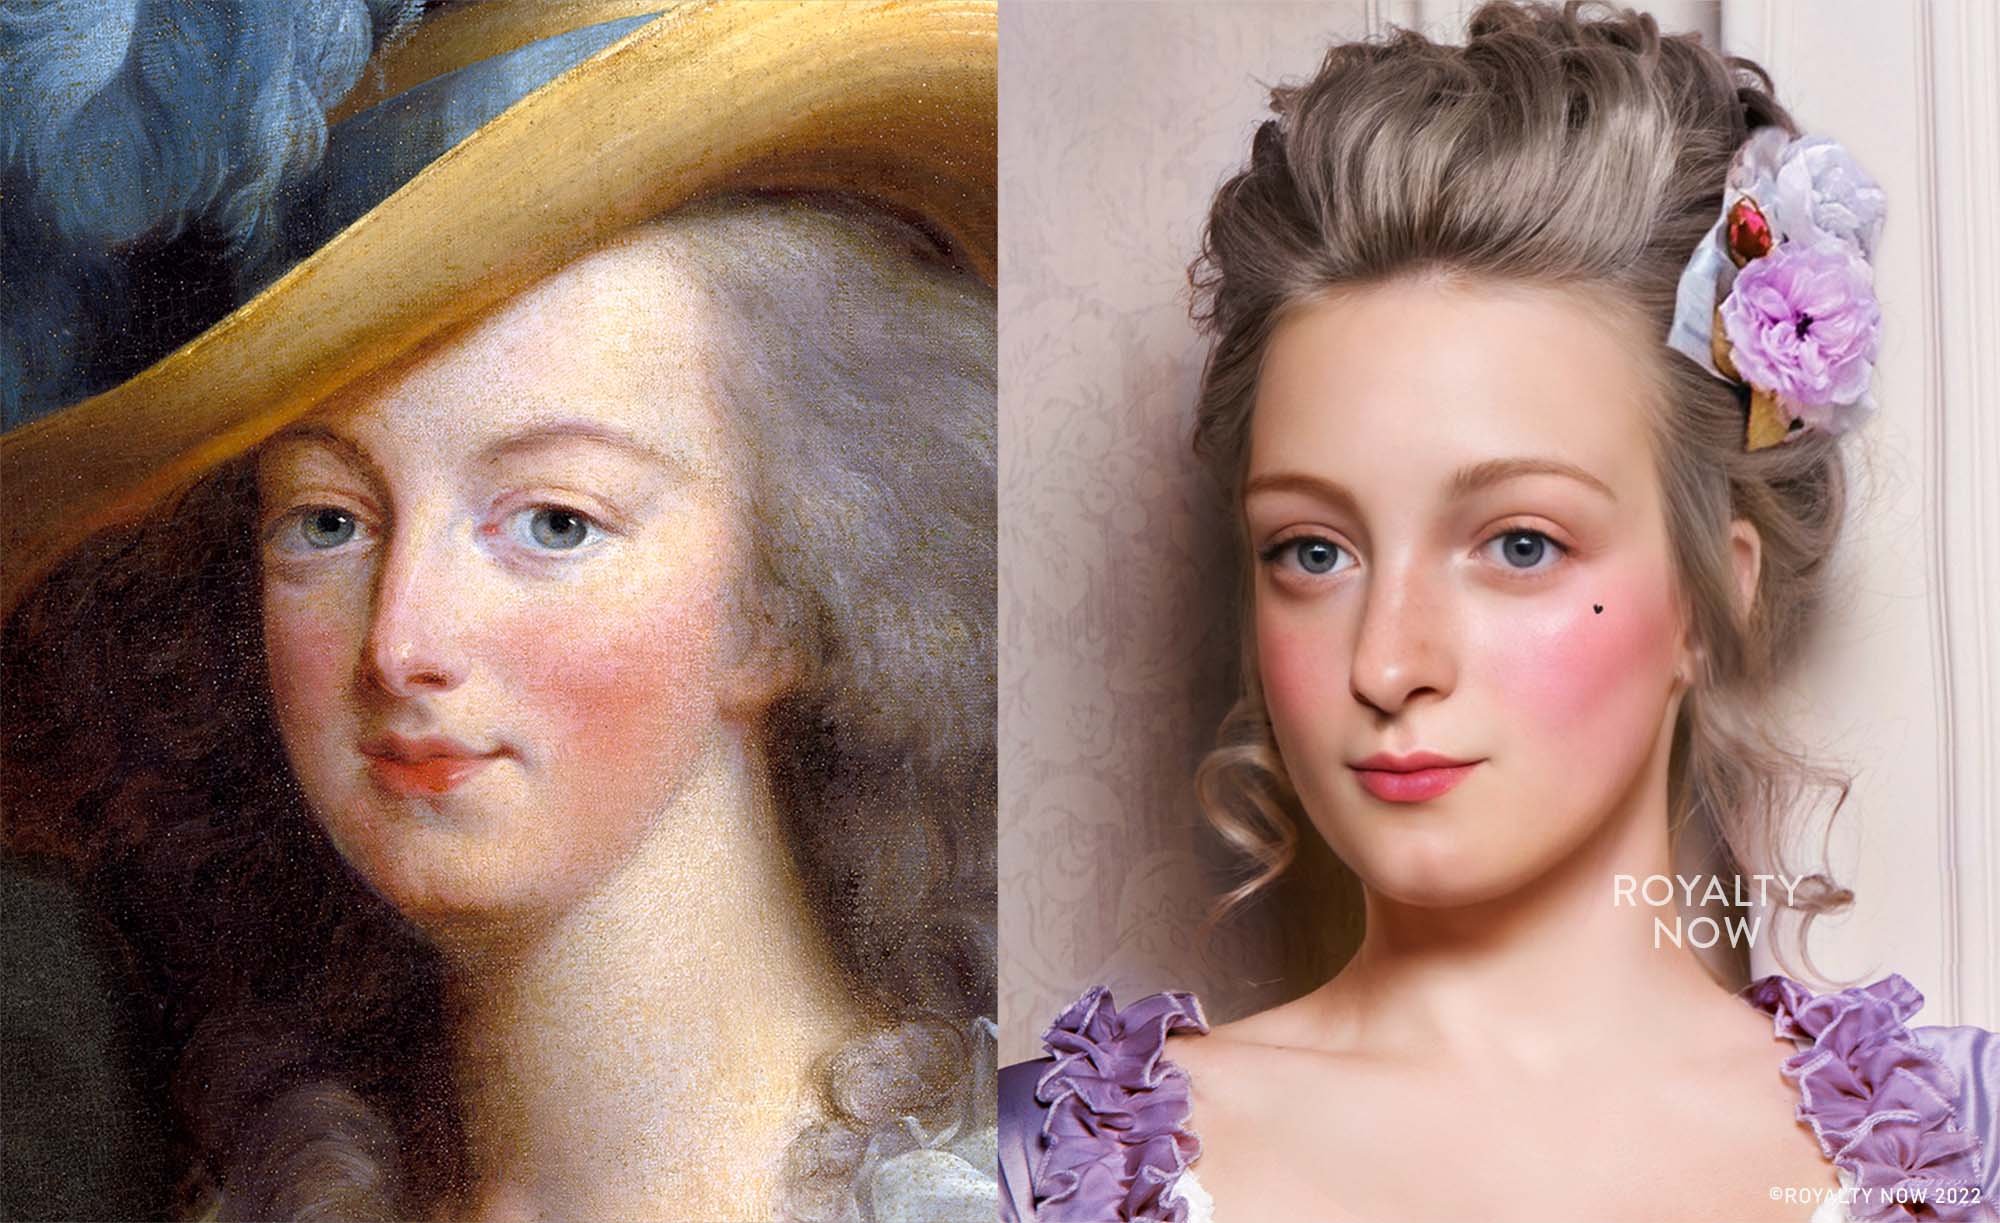 What did Marie Antoinette Really Look Like? Her Portraits and